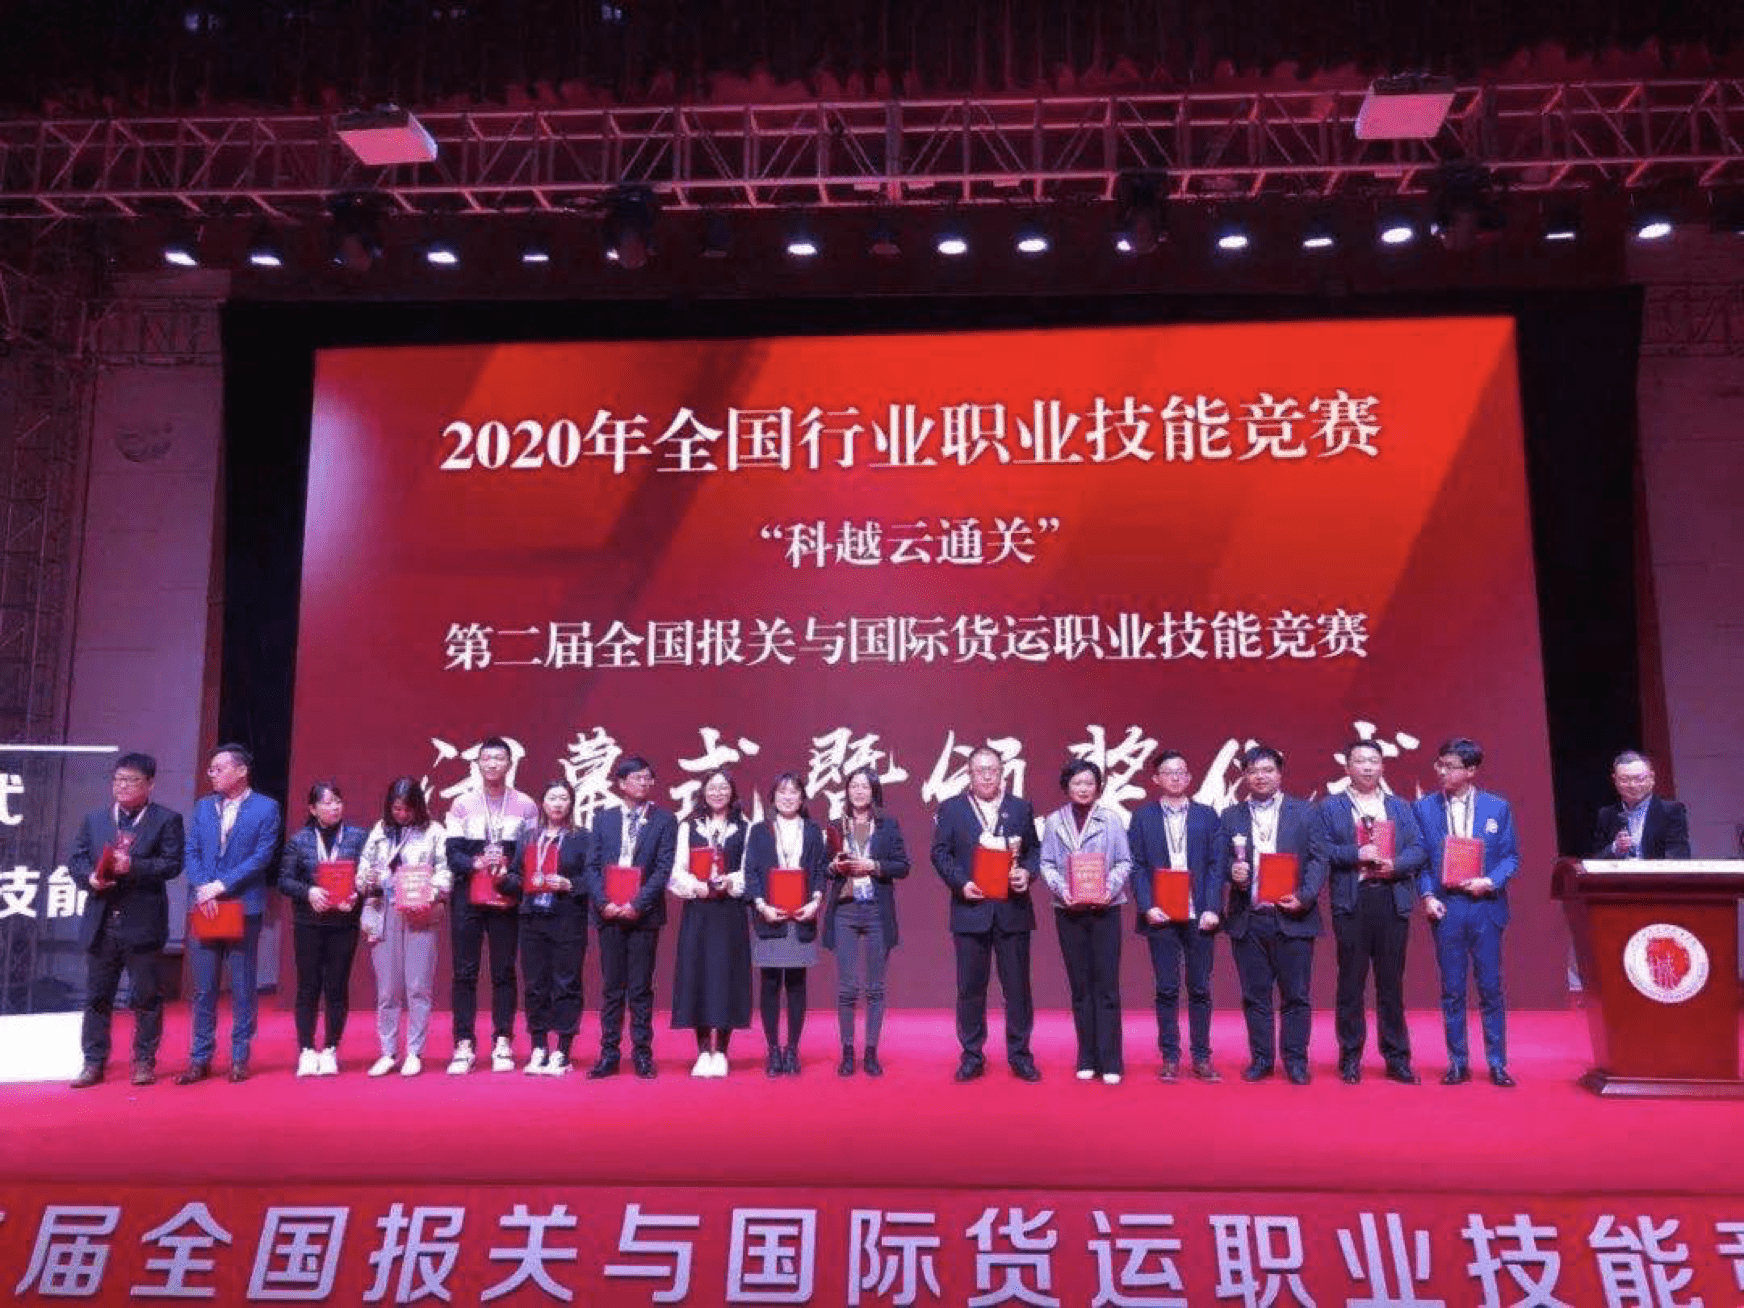 2020 National Industry Vocational Skills Competition” was held by CCBA & Oujian Group in Chongqing